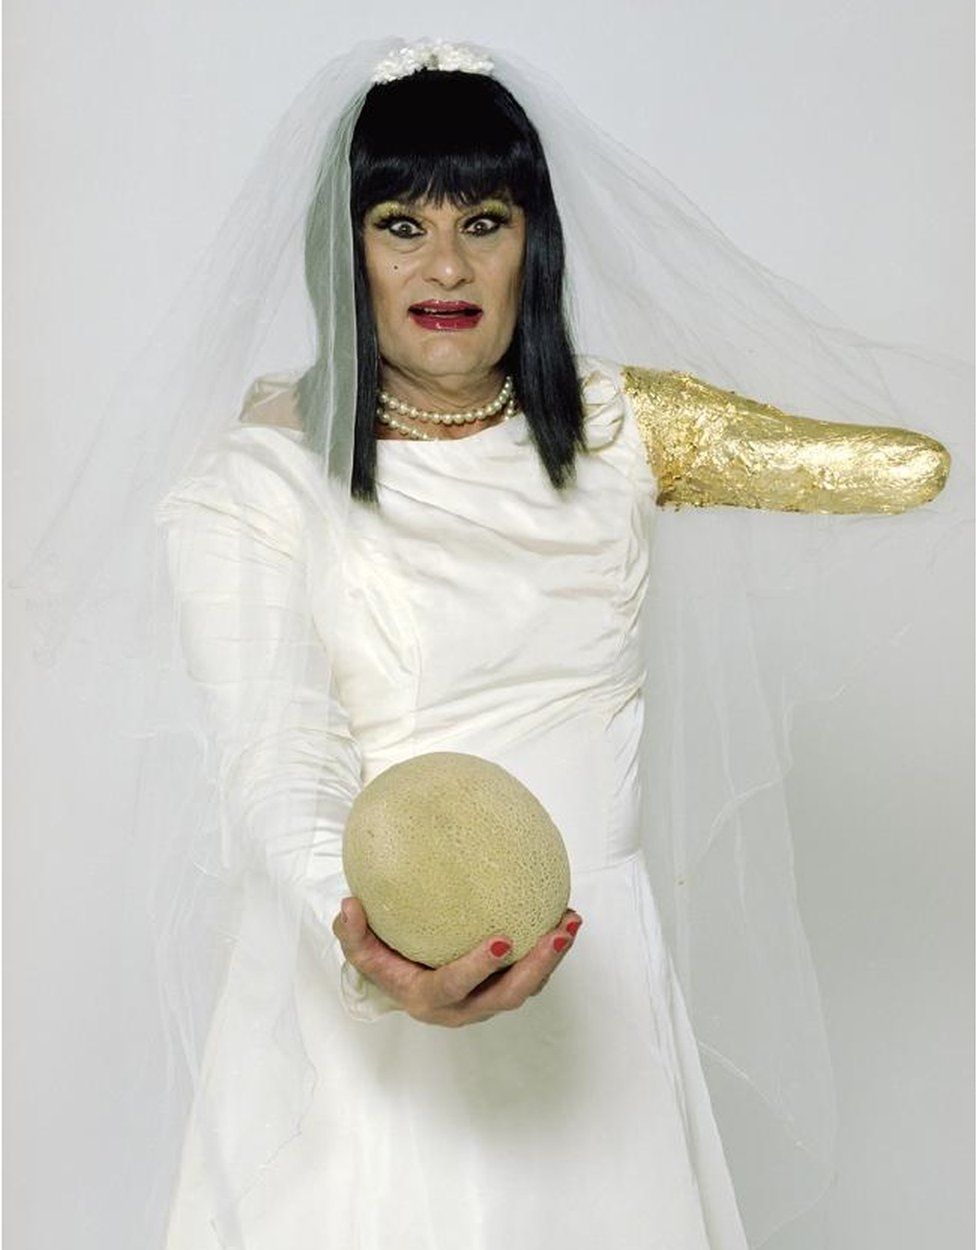 Artist Mike Parr dressed as a bride